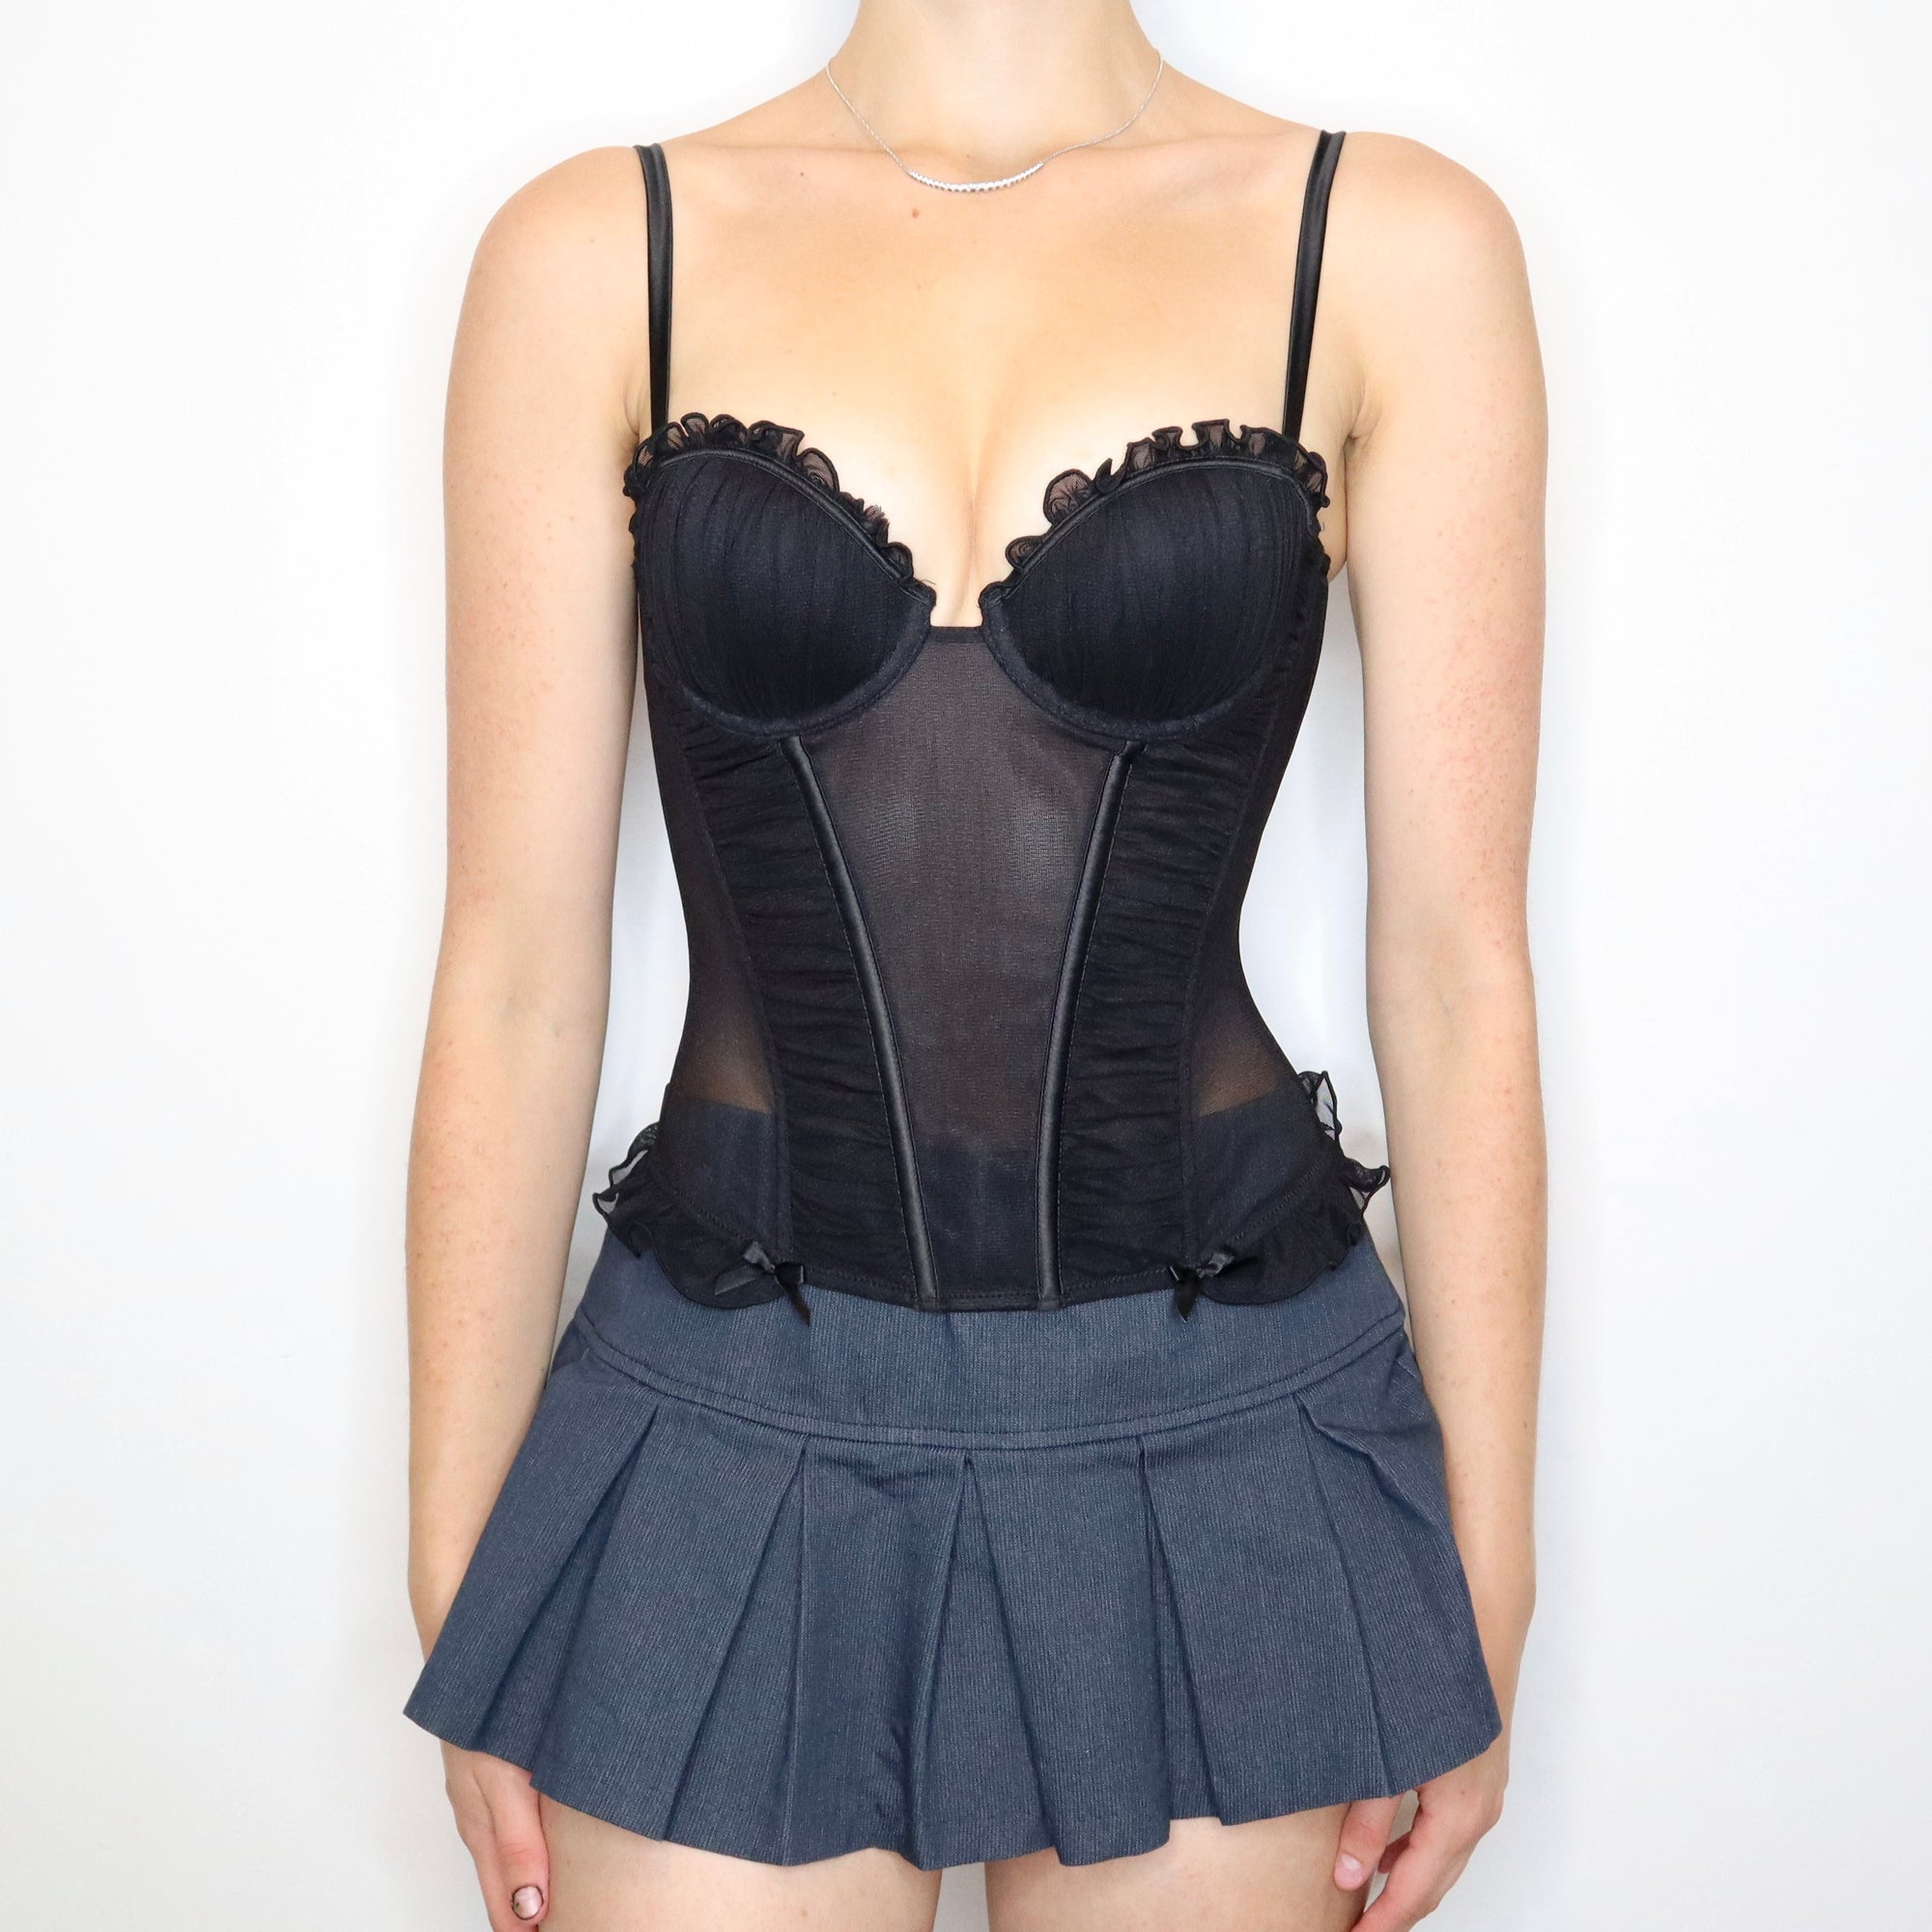 Vintage Early 2000s Black Ruched Mesh Bustier